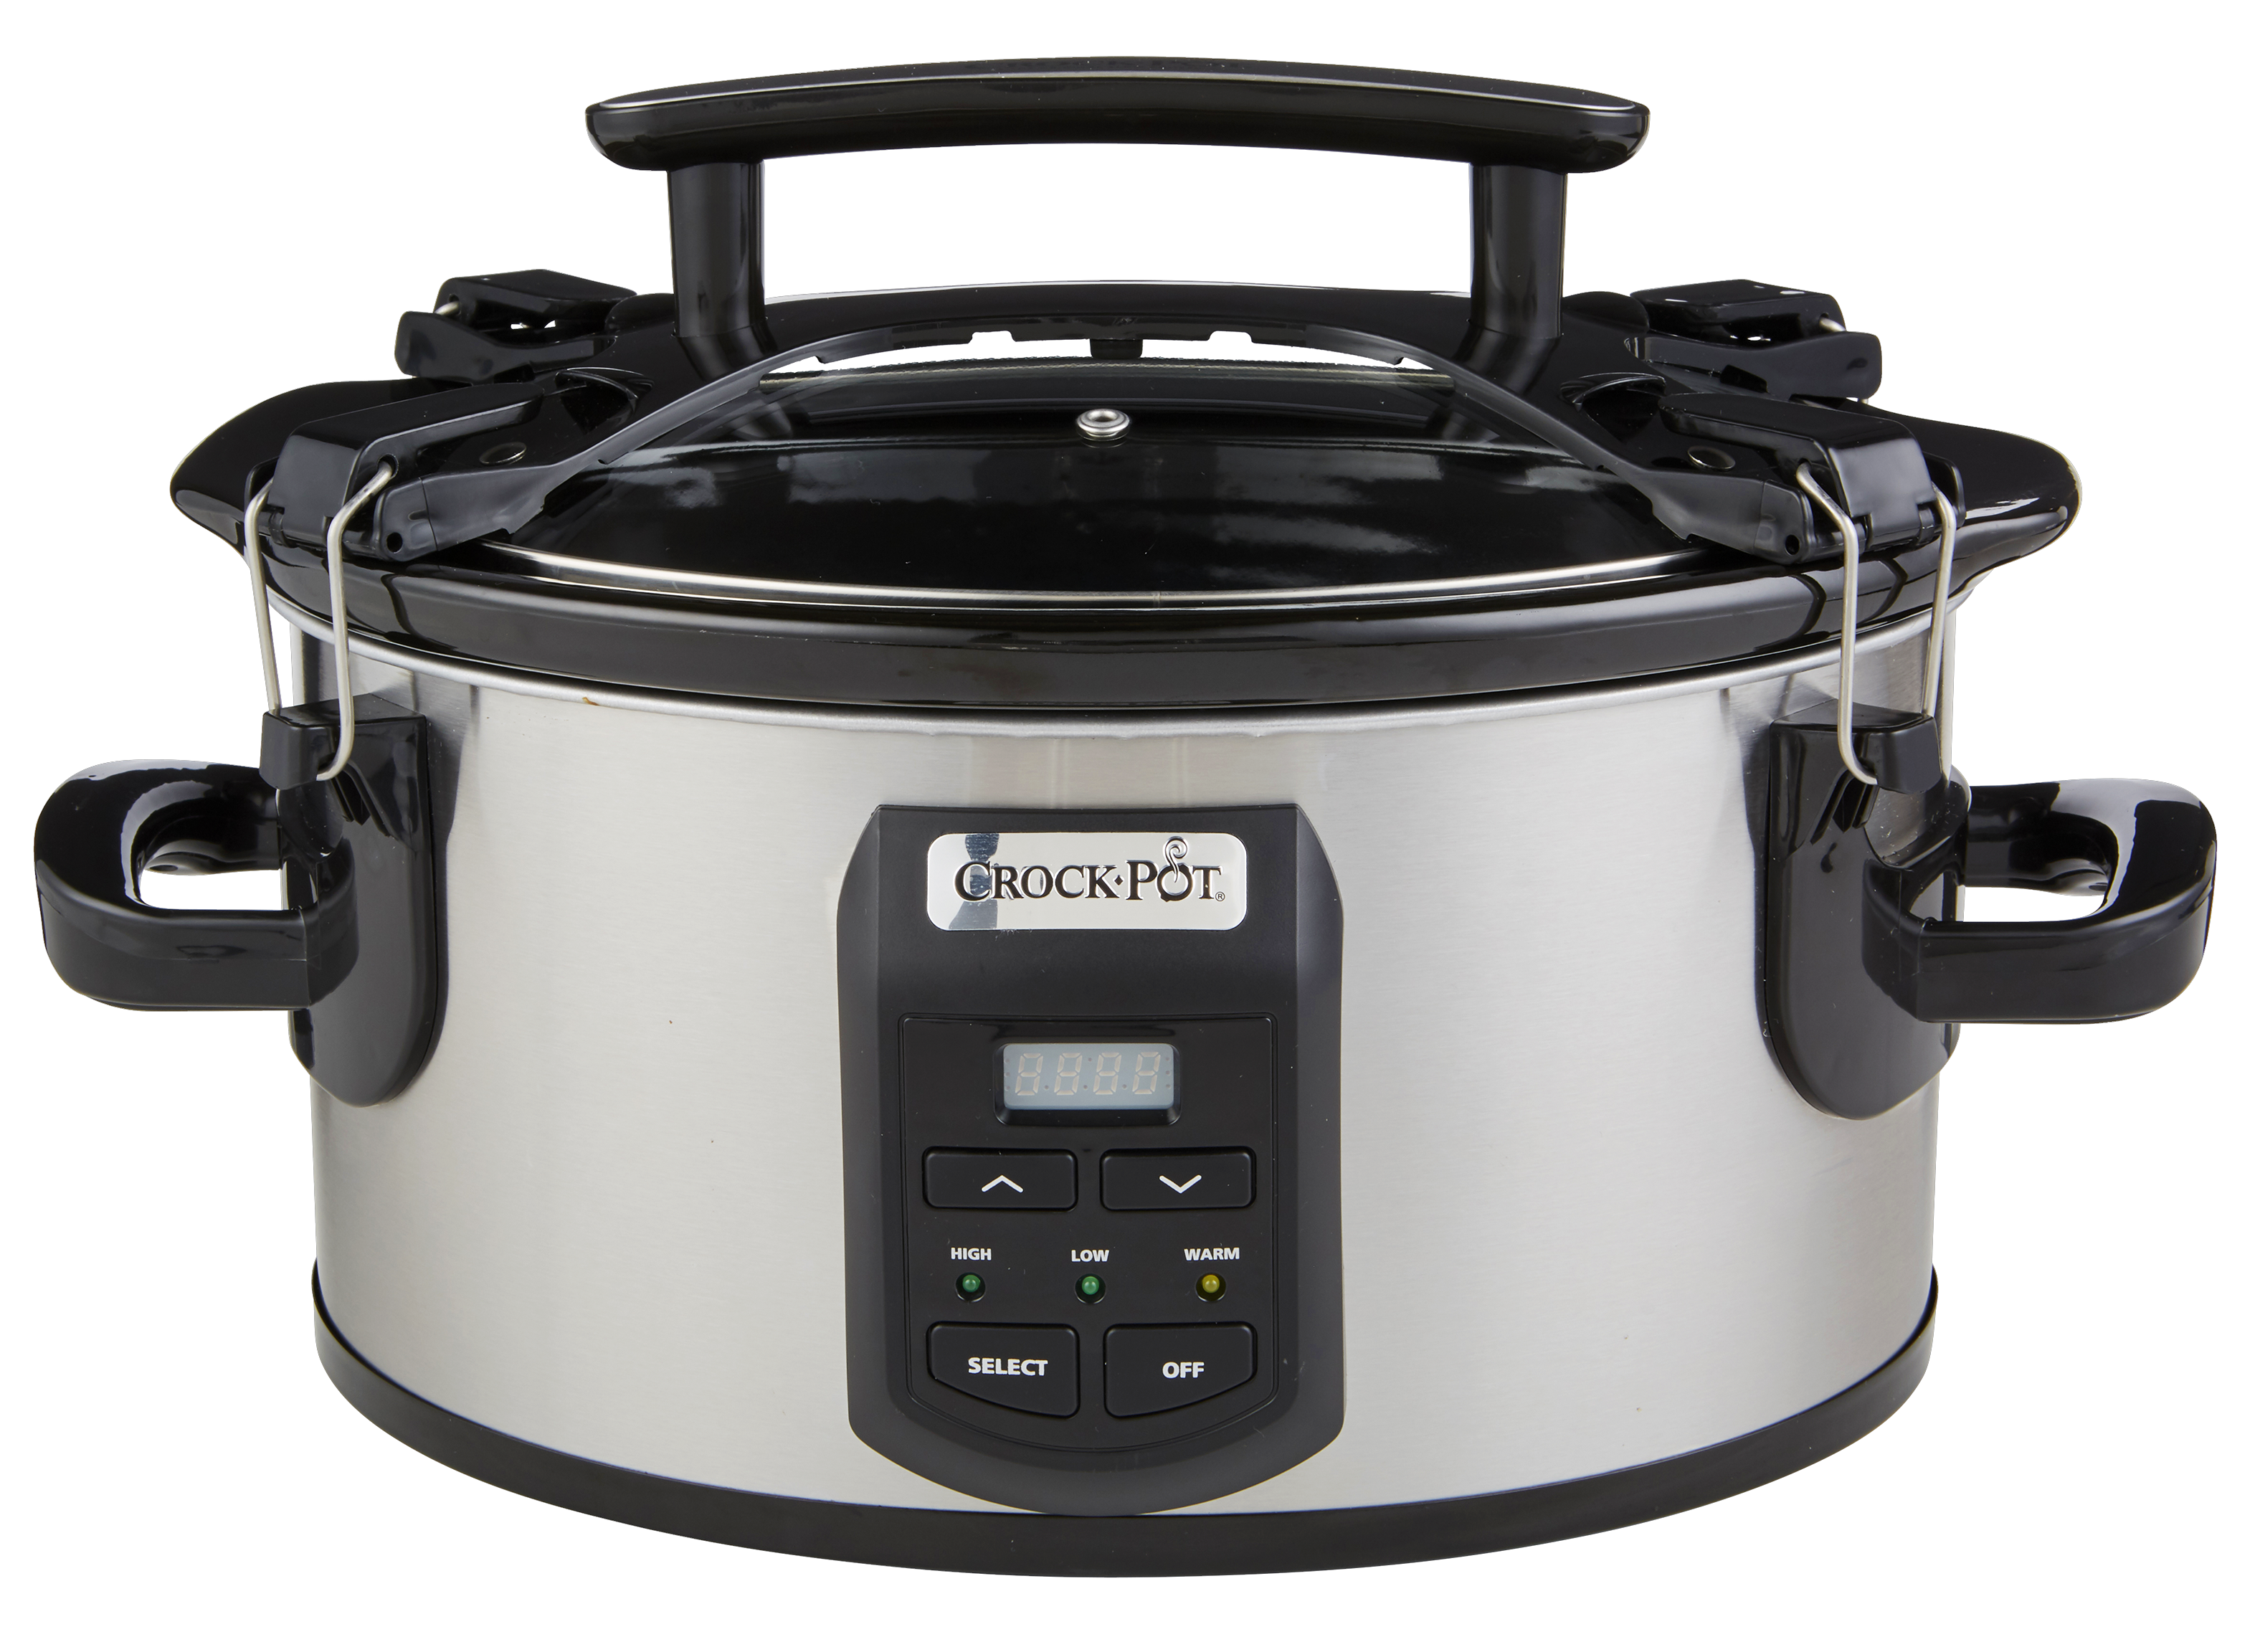 https://crdms.images.consumerreports.org/prod/products/cr/models/397134-slow-cookers-crockpot-6-0-quart-cook-carry-slow-cooker-programmable-single-hand-stainless-steel-sccpvs600ecp-s-10001387.png